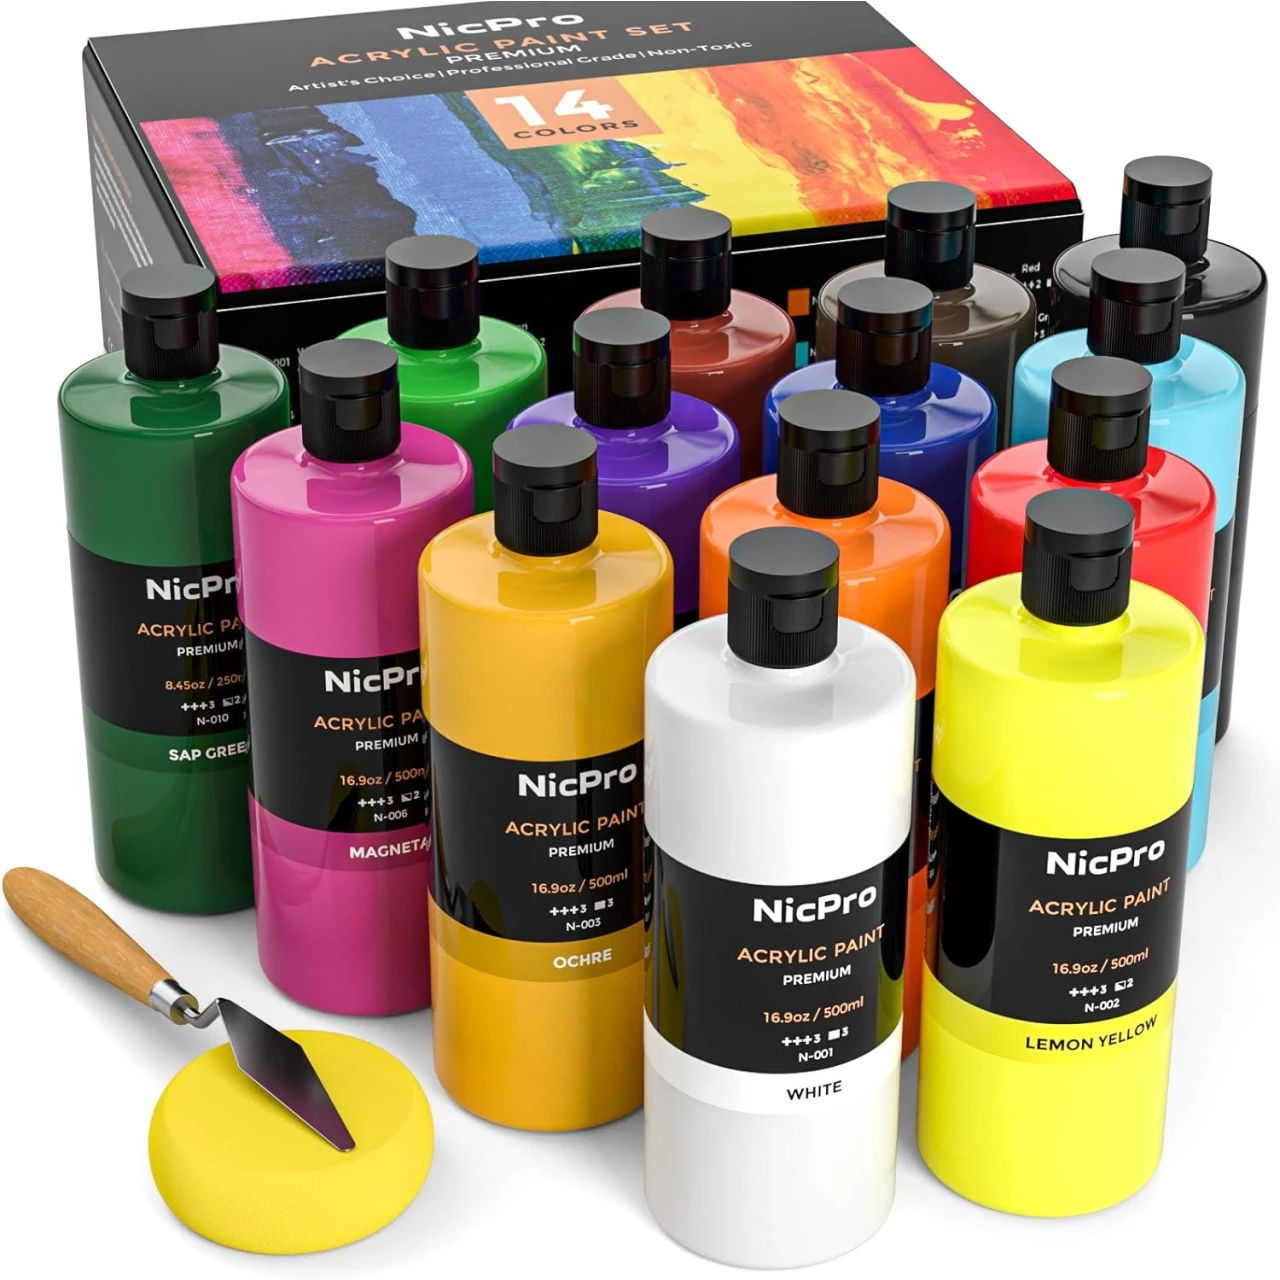 Nicpro 14 Colors Large Bulk Acrylic Paint Set (16.9 oz,500 ml) Rich Art Painting Supplies, Non Toxic for Multi Surface Canvas Wood Leather Fabric Stone Craft, for Kid &amp; Adult with Color Wheel